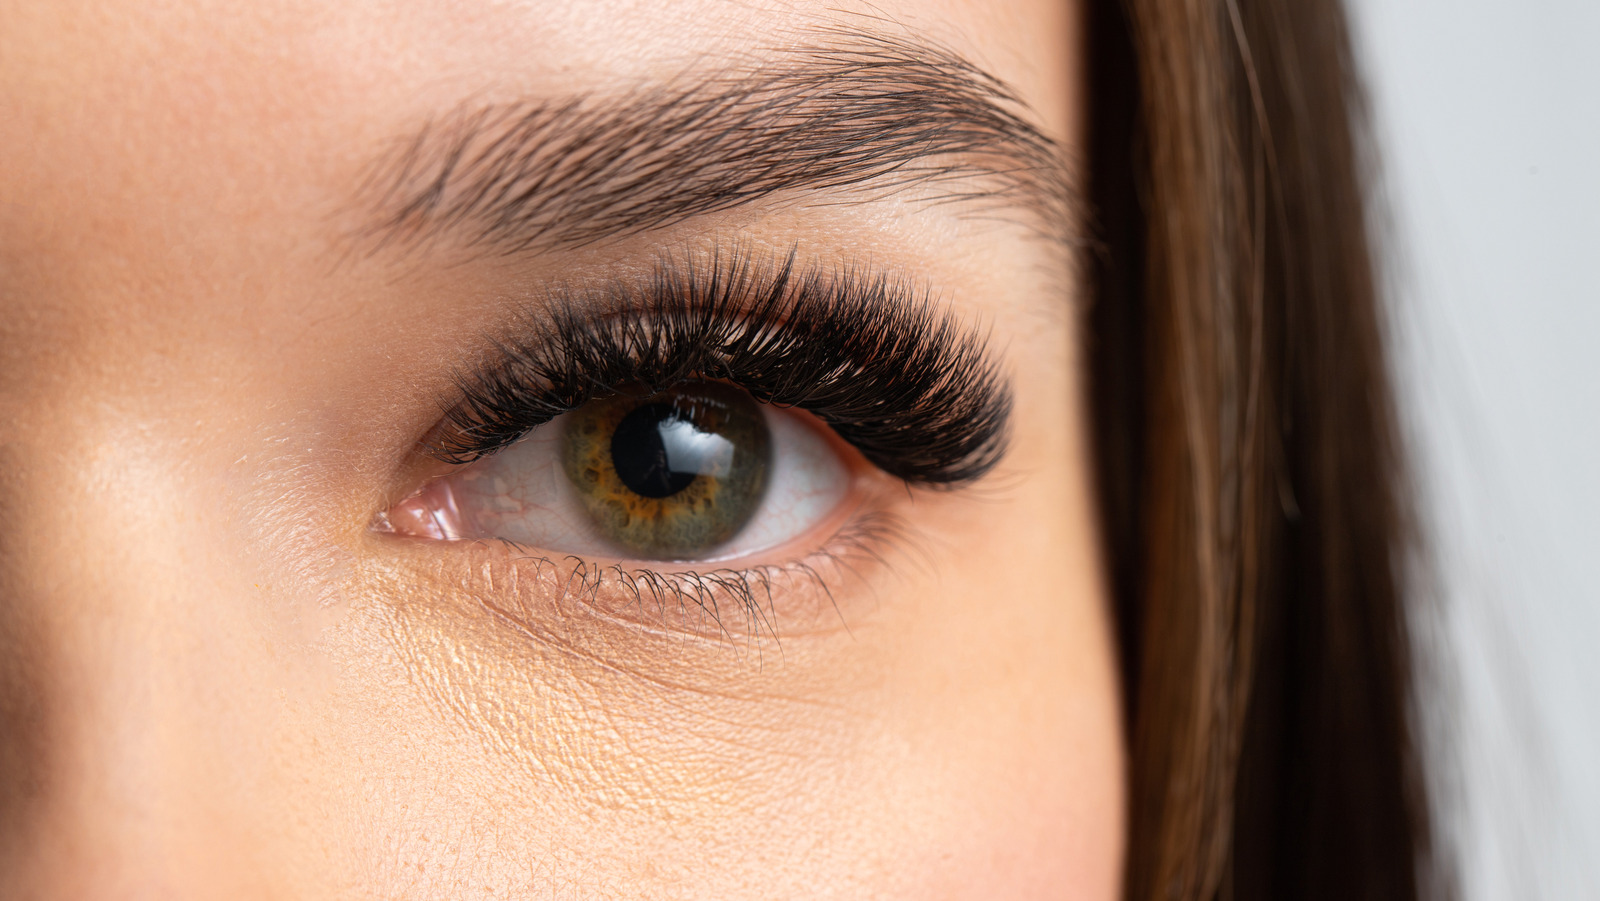 How To Properly Clean And Disinfect Your False Eyelashes